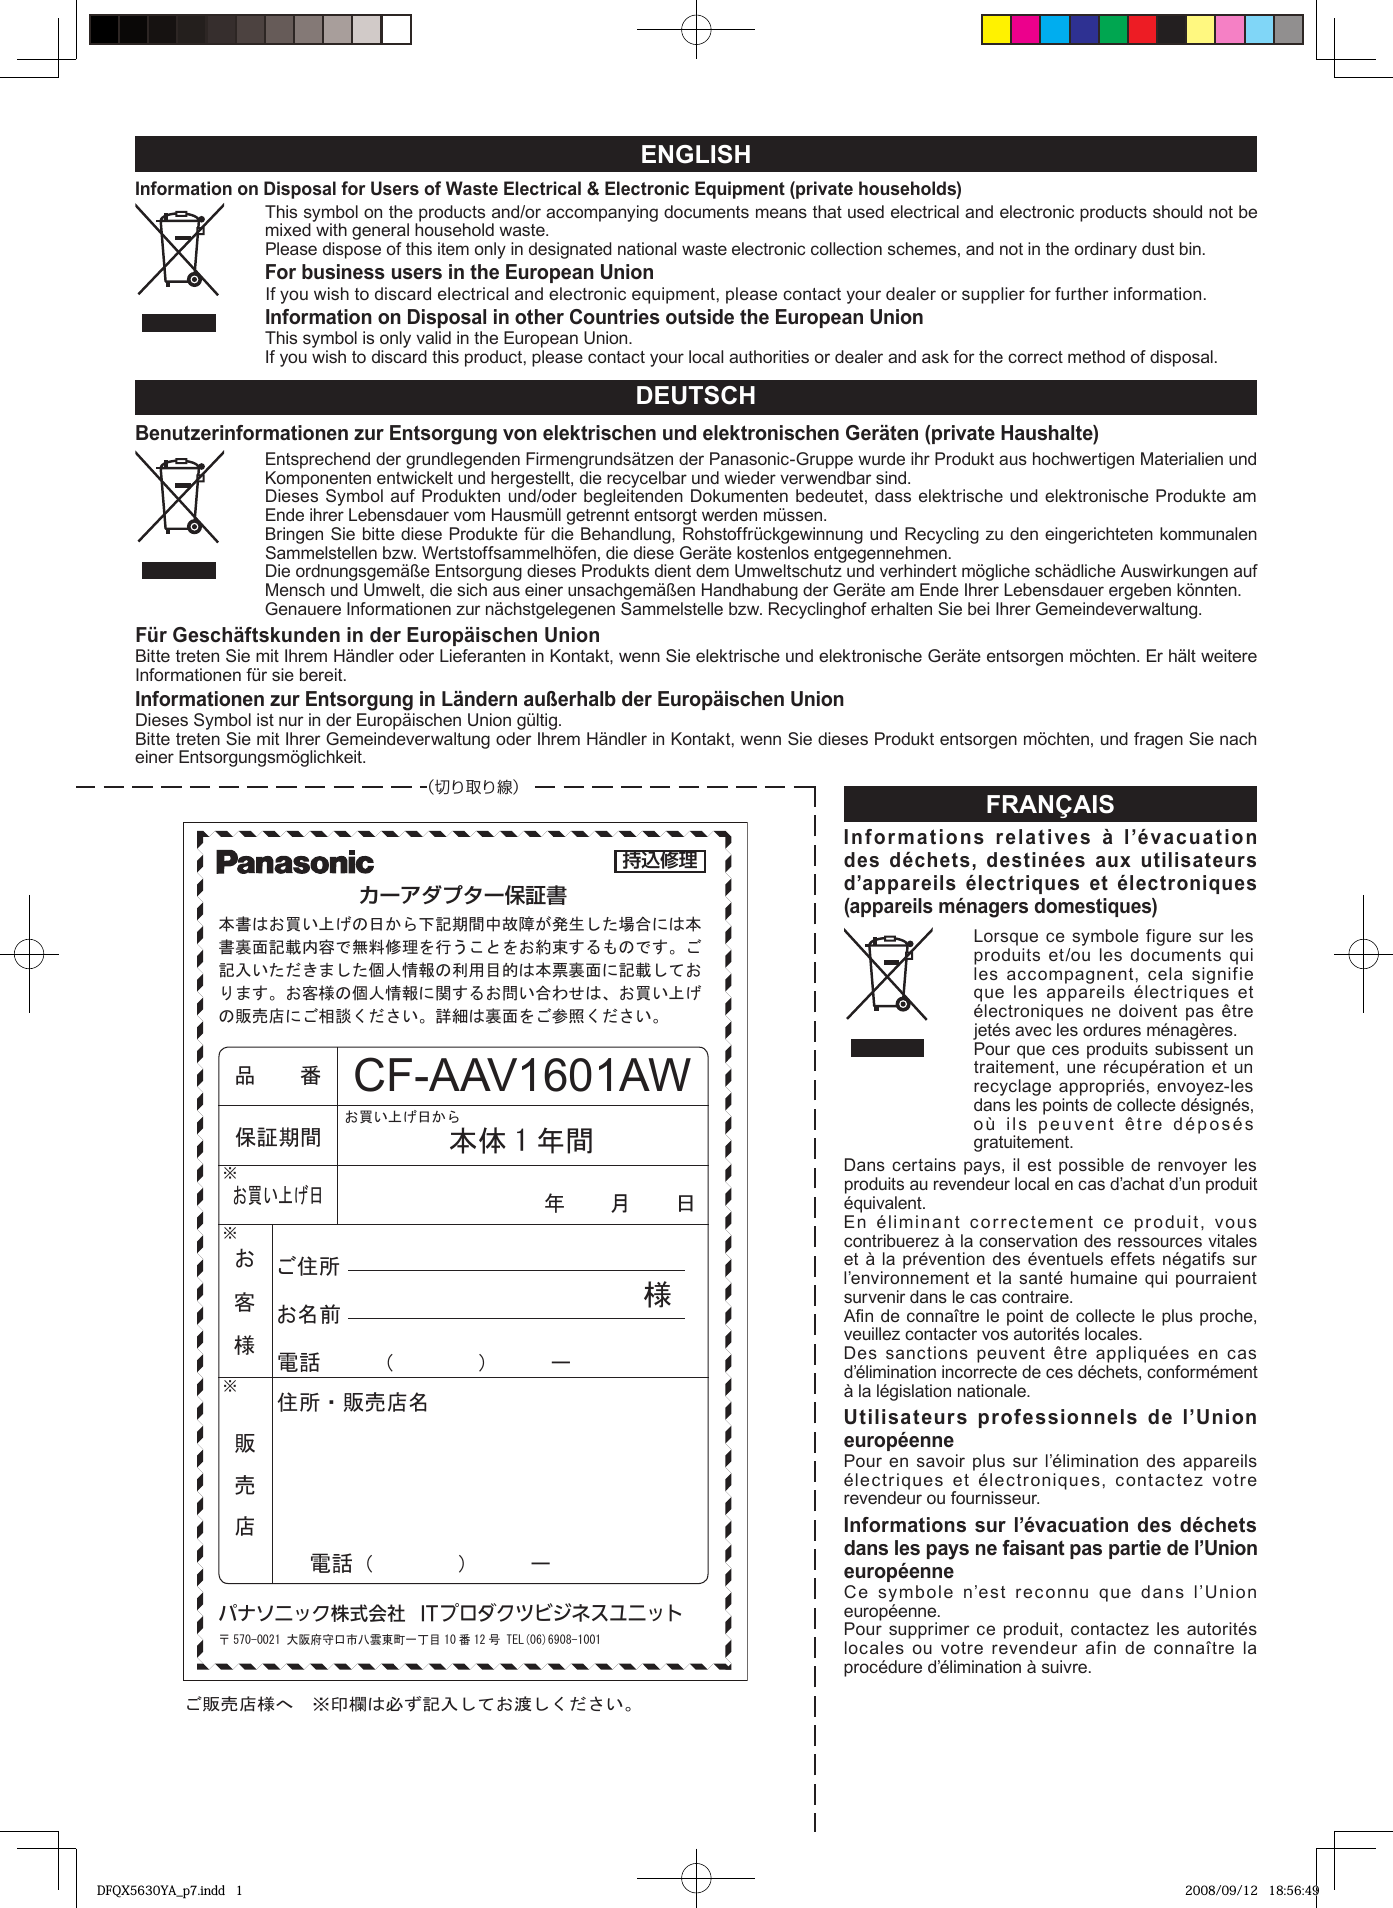 Page 7 of 8 - Panasonic CF-AAxxxx (AC Adapter) 使用手册 : Operating Instructions (English/ German/ French/ Chinese[S]/ Chinese[T]/ Korean/ Japanese) (Revision) Aav1601aw-oi-dfqx5630wa-non-nonlogo-JMGFCSCTKO-p20110072